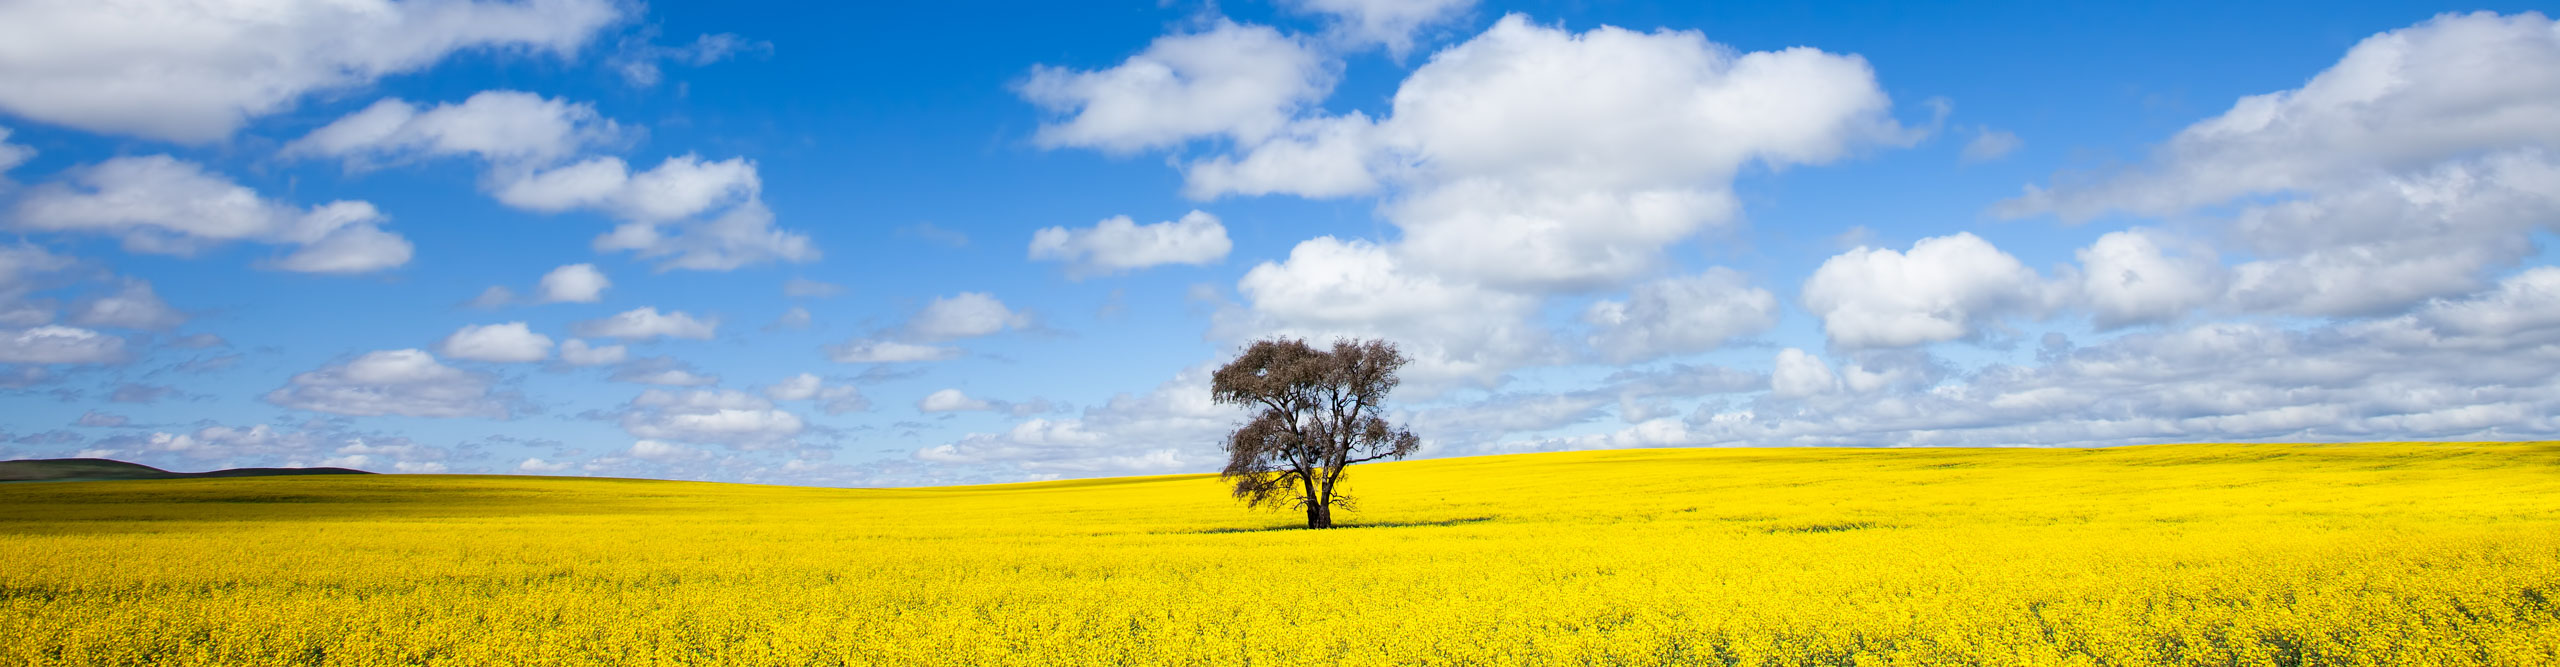 Single tree in a canola field, Clare Valley, South Australia 